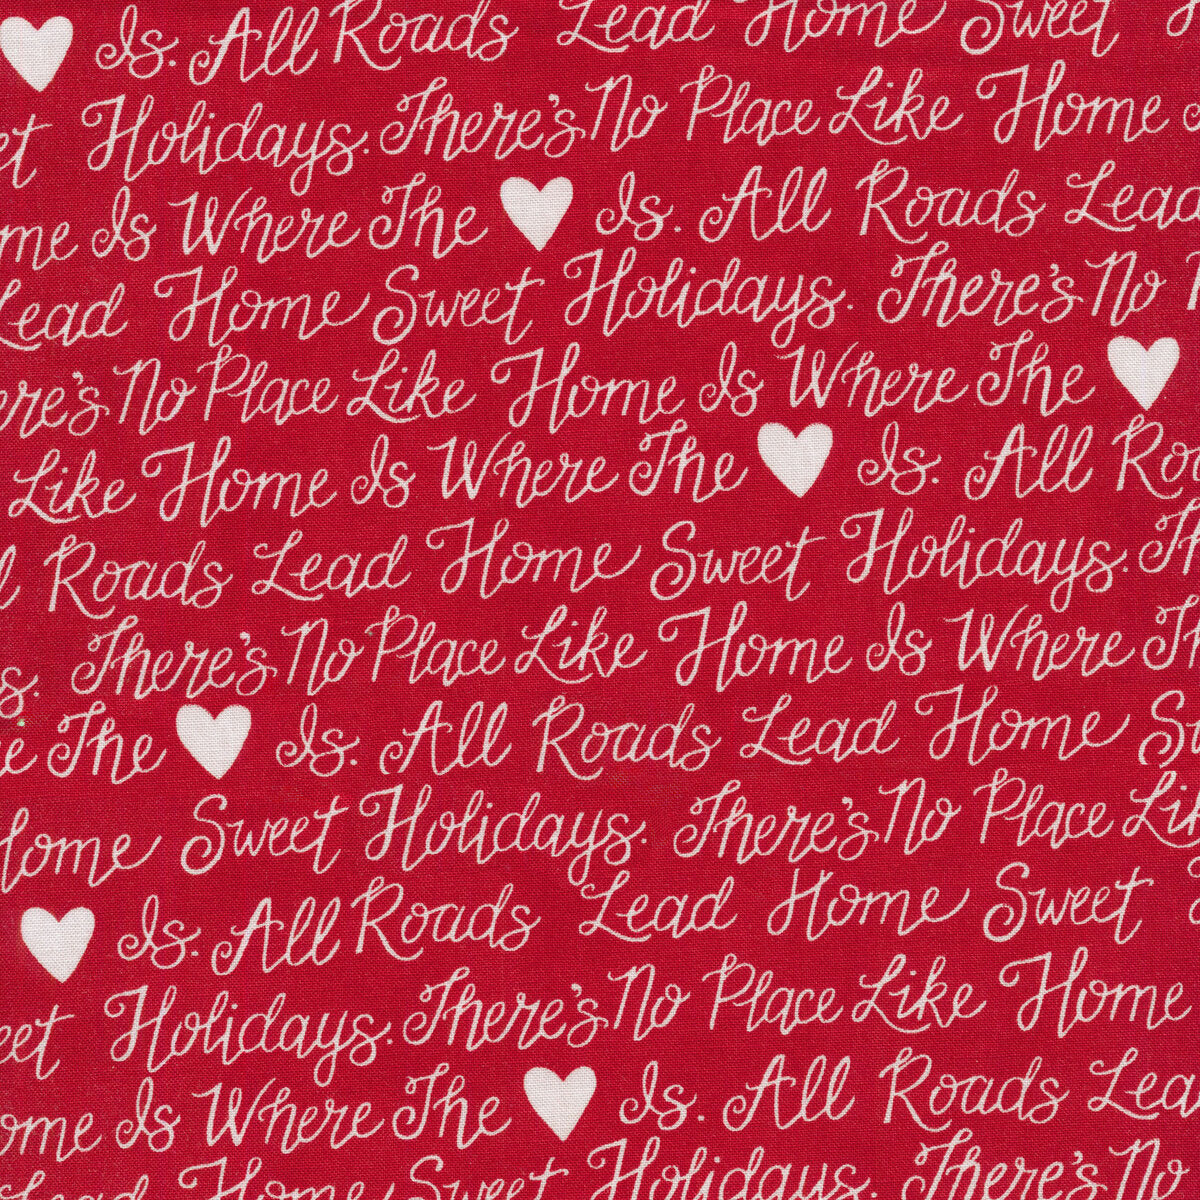 Holidays At Home Berry Red Words